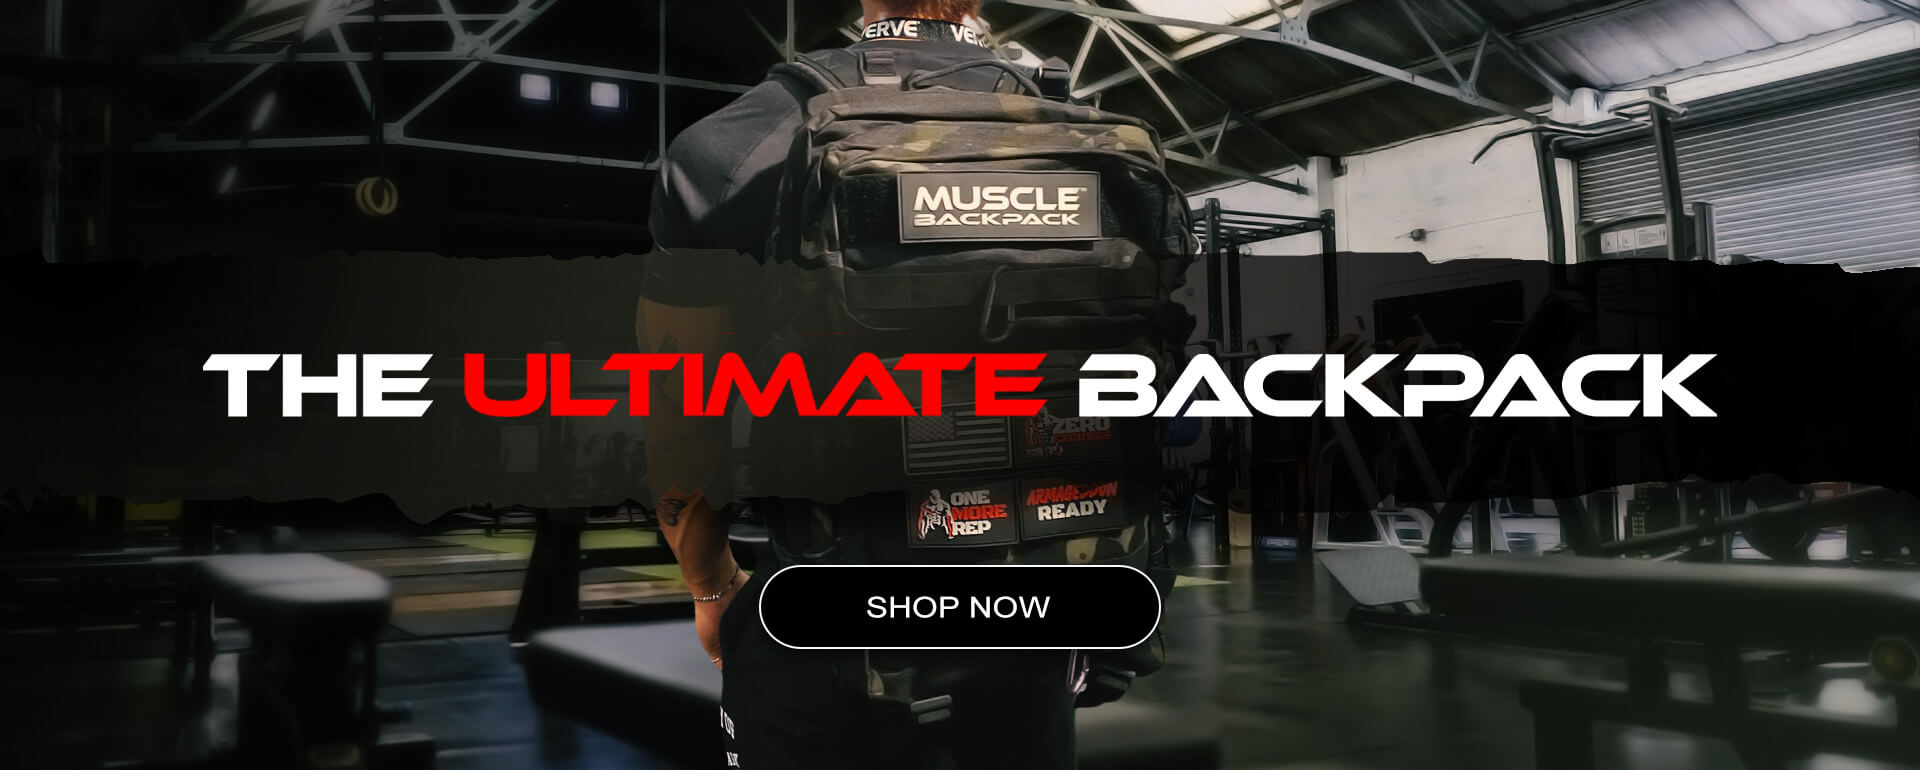 Muscle Backpack - The Ultimate Backpack (1)